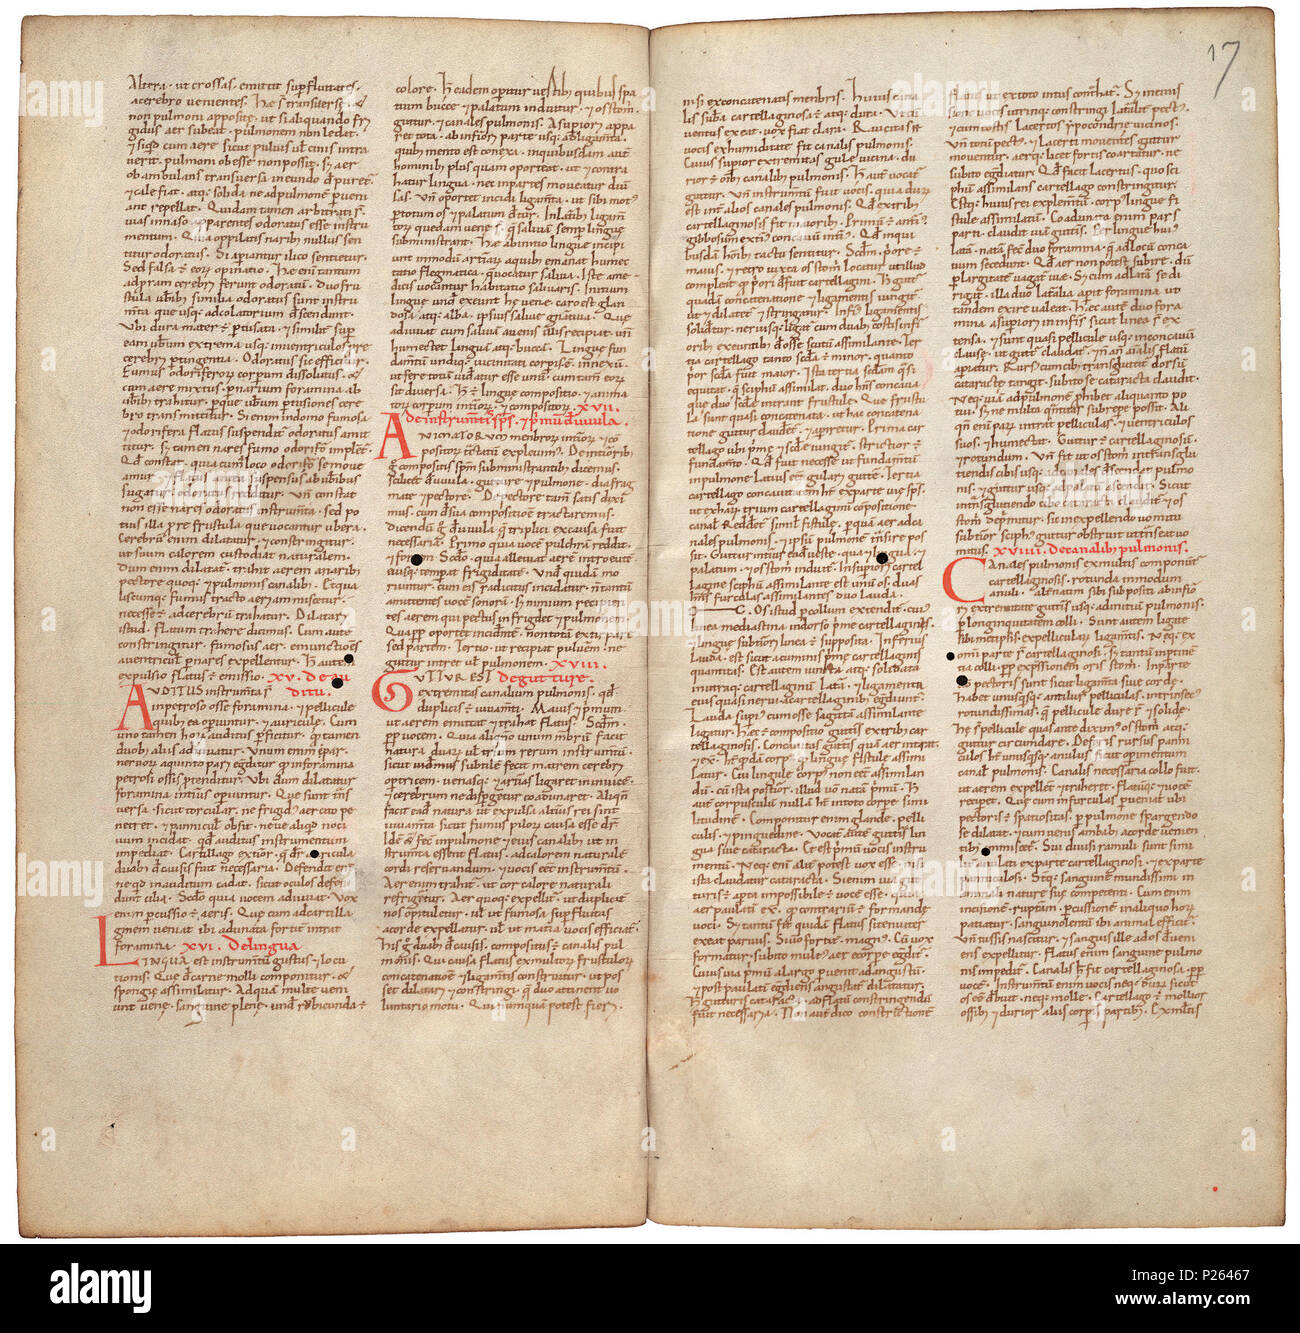 . Pantegni pars prima theorica (lib. I-X) - folios 016v (left) and 017r (right)  .  Lefthand side folio 016v; righthand side folio 017r from an 11th century copy of the Liber pantegni. This is the earliest known copy (prior to 1086) of the Liber pantegni, made at Monte Cassino under the supervision of Constantine the African. It is dedicated to Abbot Desiderius of Monte Cassino (1027-1087), before he became Pope Victor III. Read backgroud information in Dutch and in English. . Constantine the African (ca. 1010-1098/9) 175 Liber pantegni - KB 73 J 6 - folios 016v (left) and 017r (right) Stock Photo